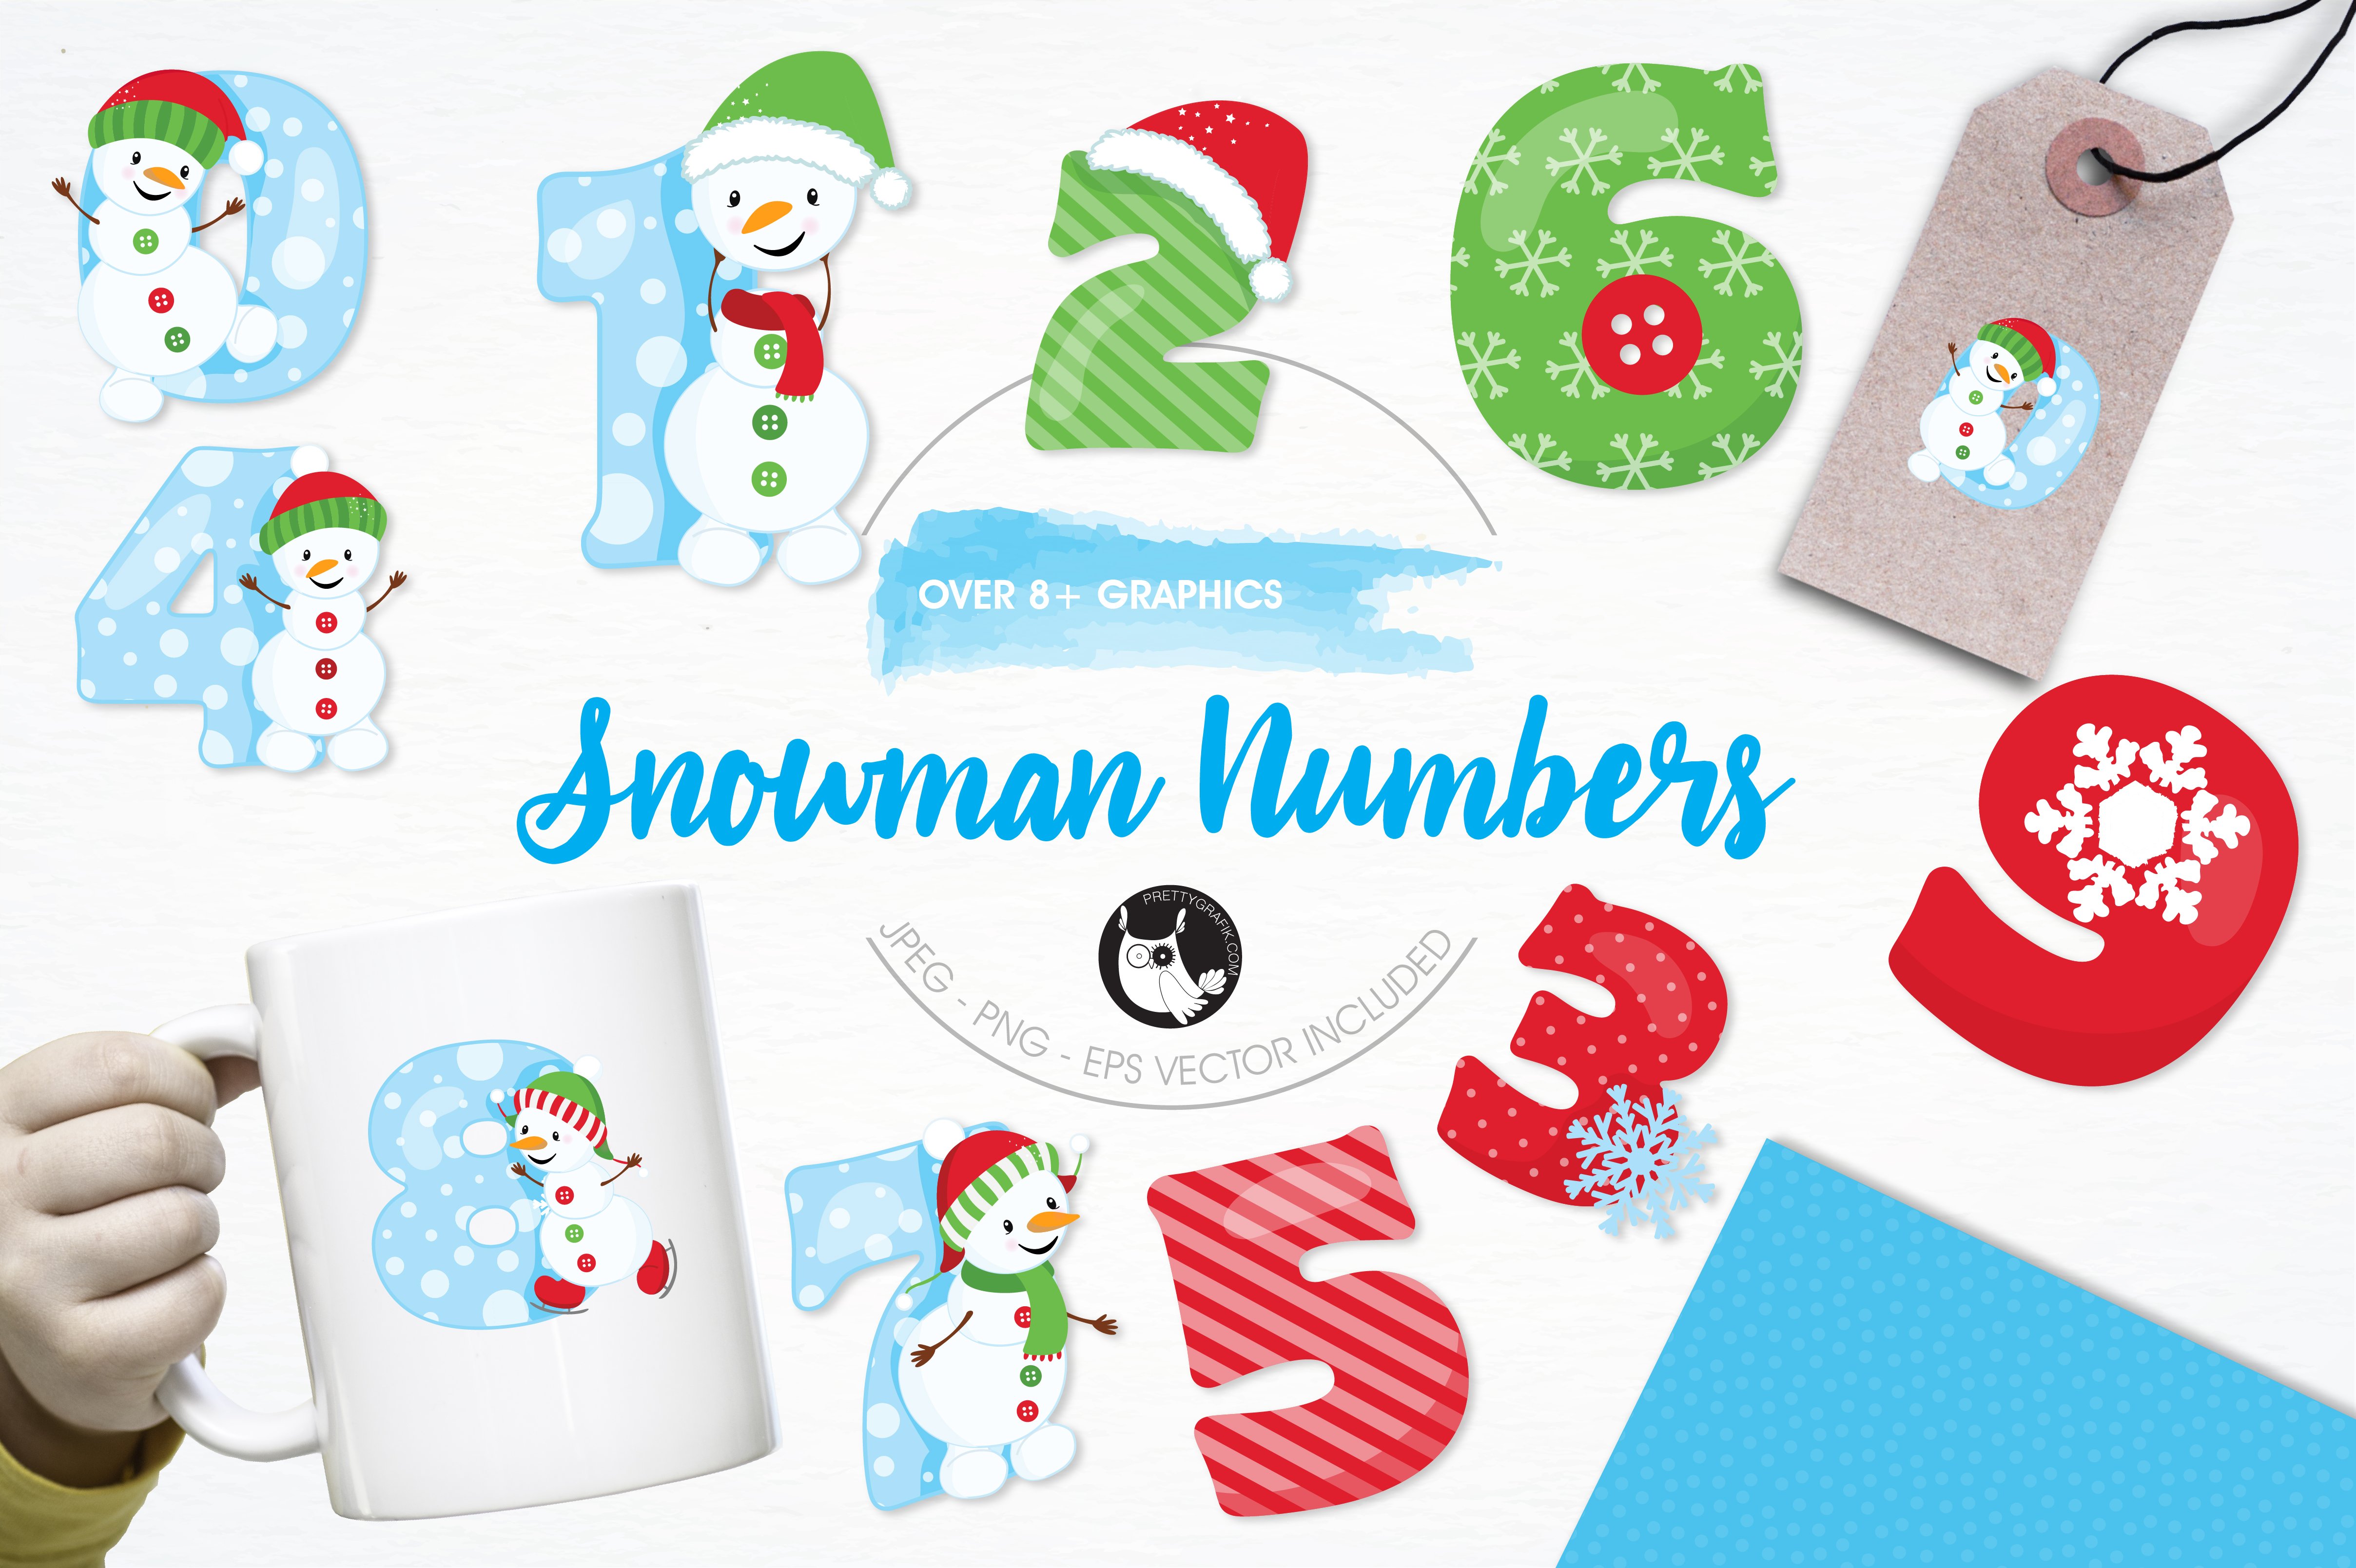 Snowman numbers illustration pack - Vector Image